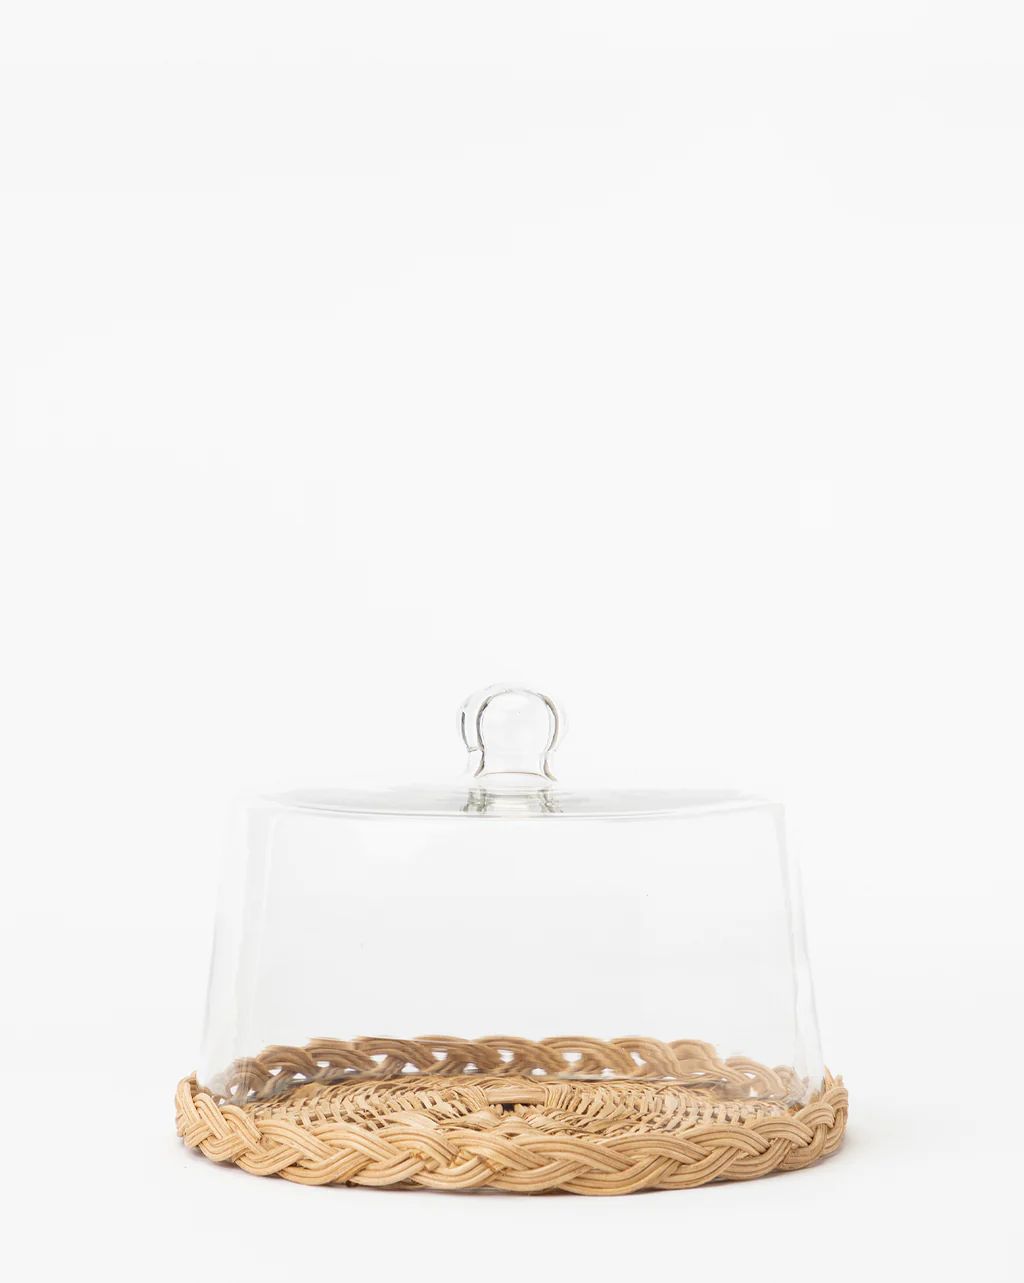 Woven Cane Pastry Cloche | McGee & Co. (US)